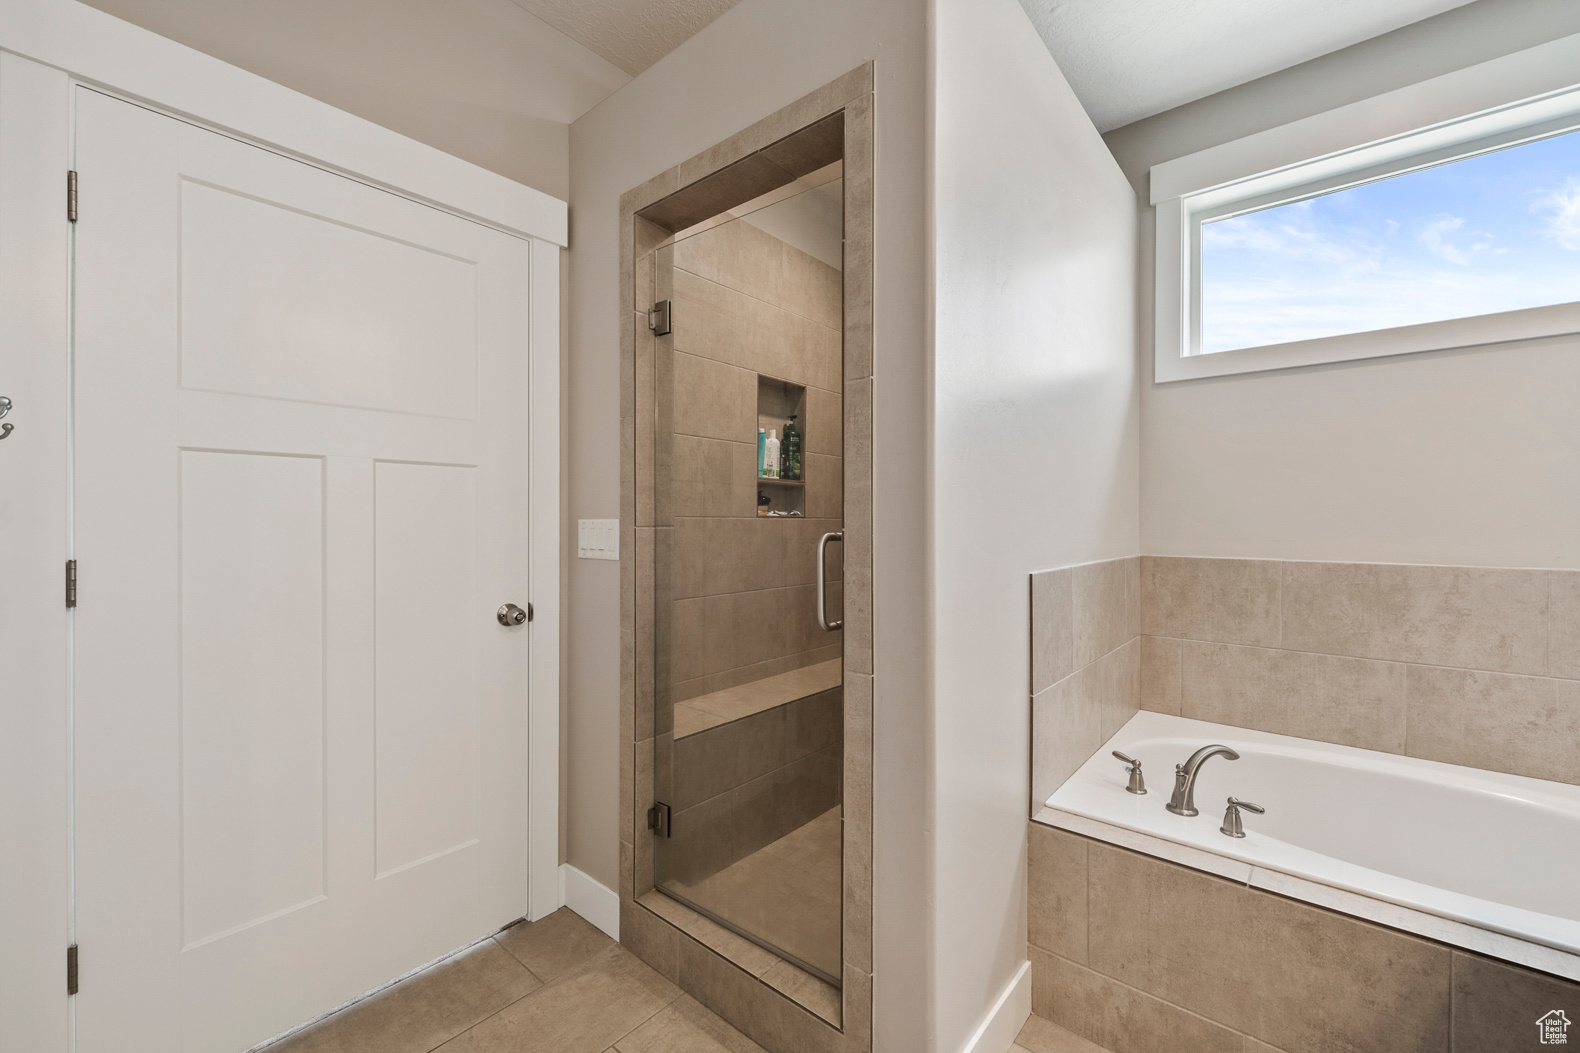 Bathroom featuring tile floors and plus walk in shower